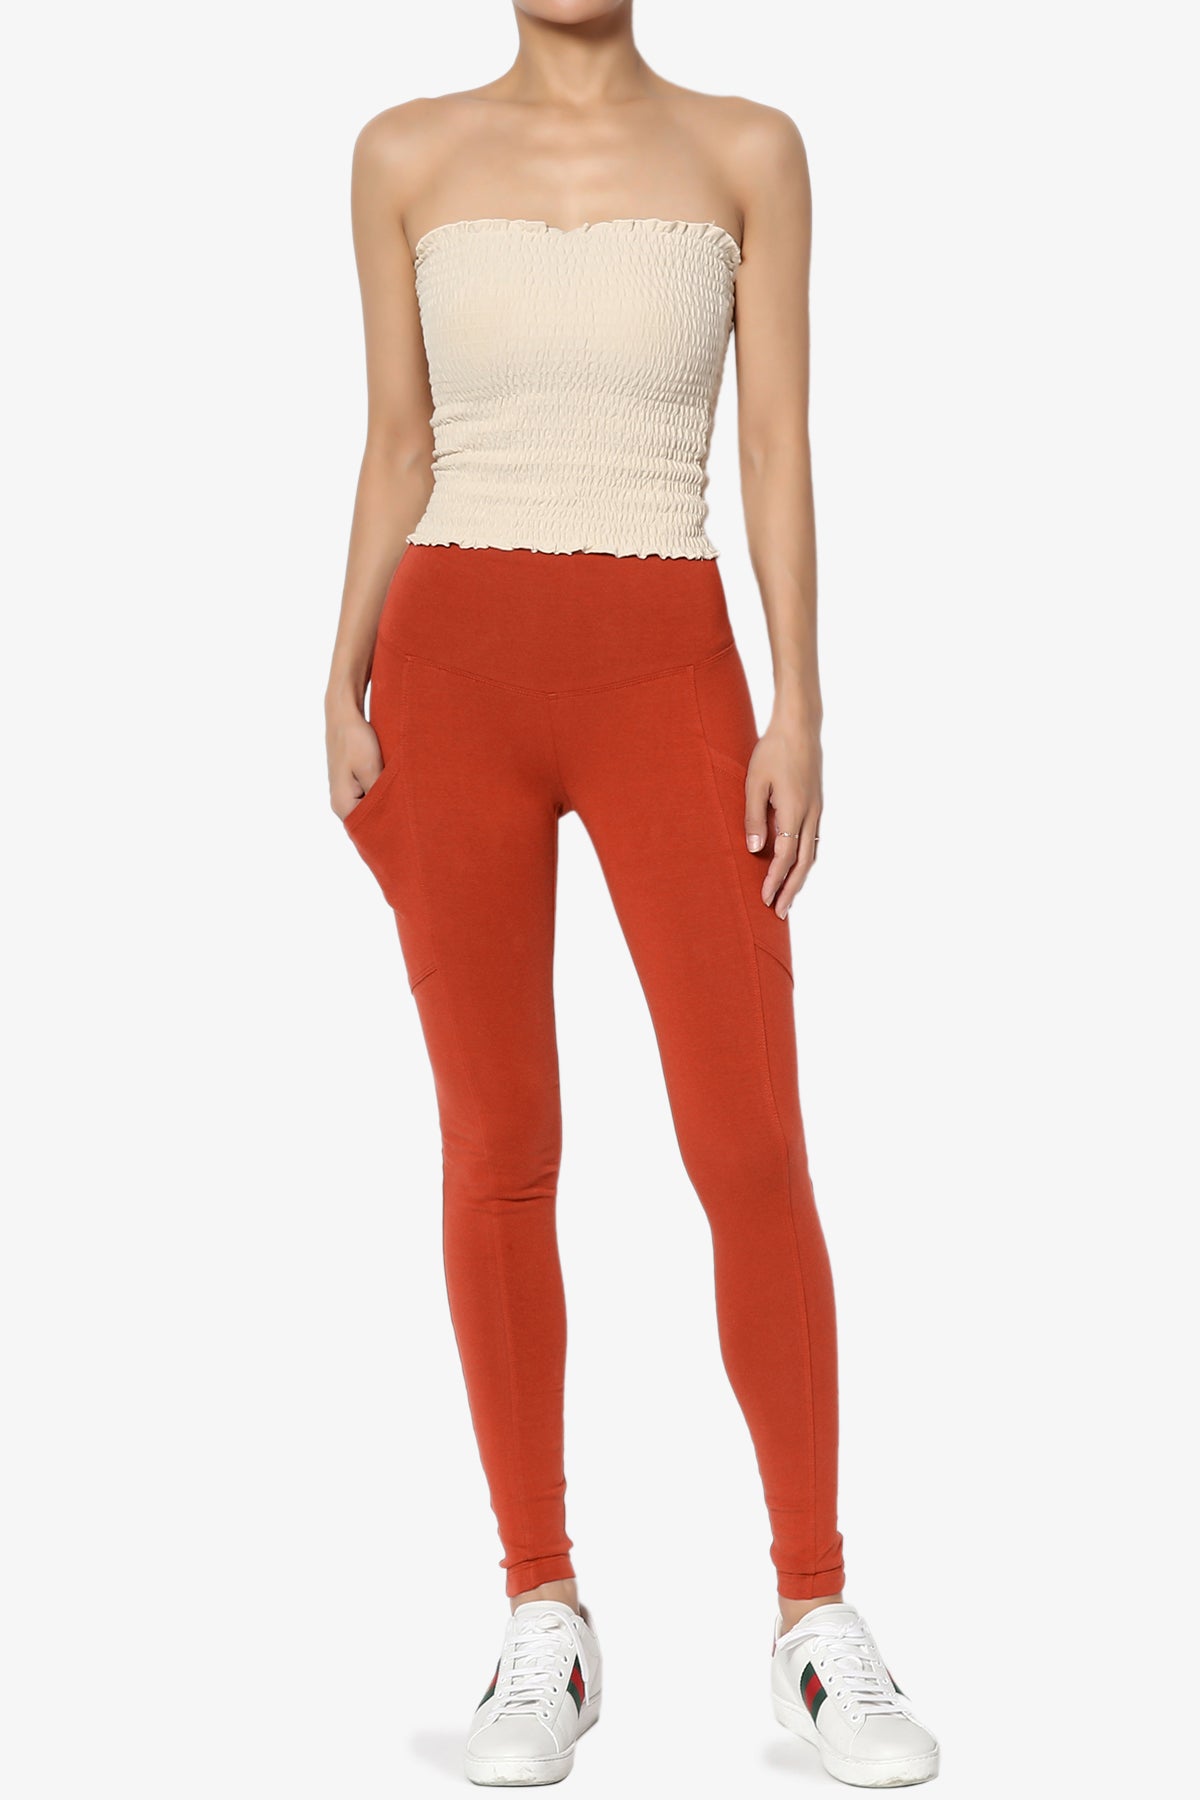 Ansley Luxe Cotton Leggings with Pockets COPPER_6